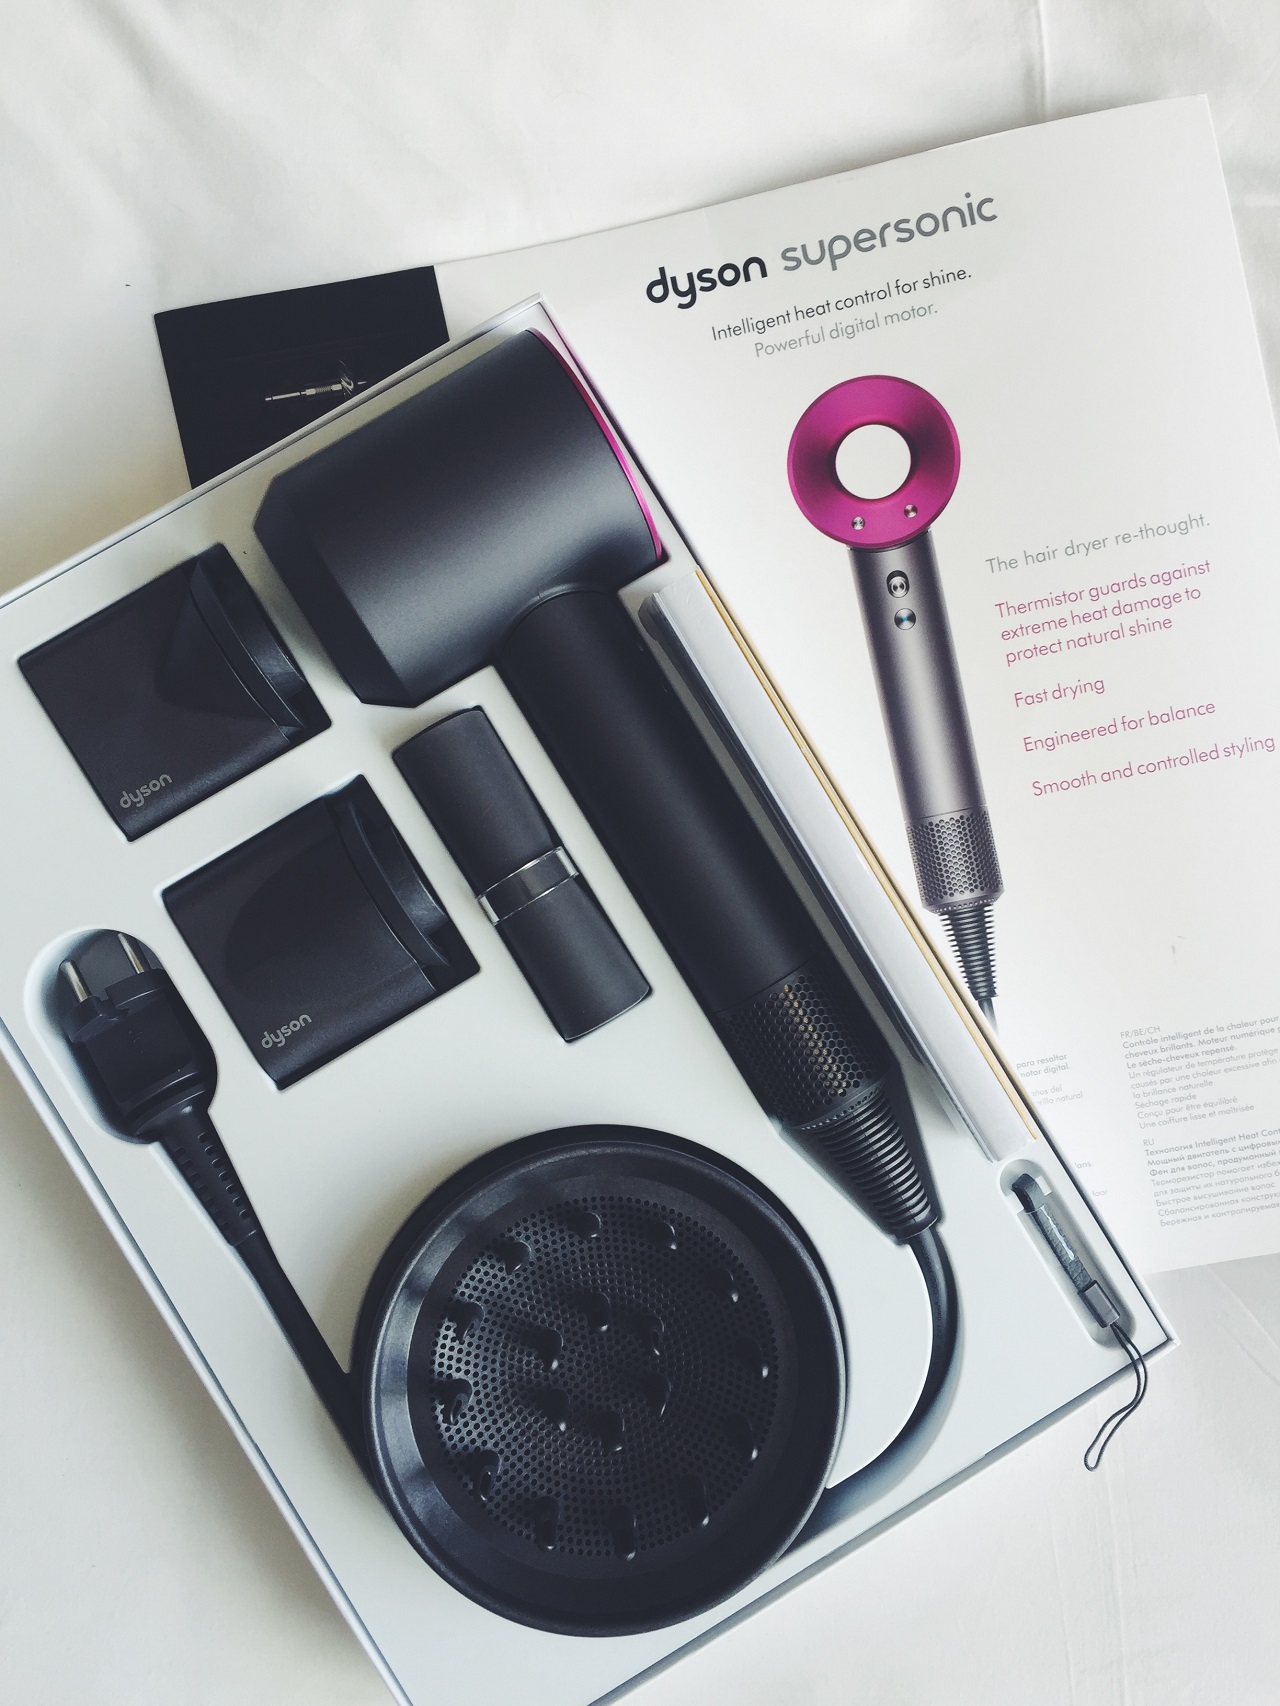 ((FULL)) Dyson Hair Dryer: The Best Supersonic Prices And Sales In April 2019 3D759A0C-488D-4449-8676-FC172DDC19F1